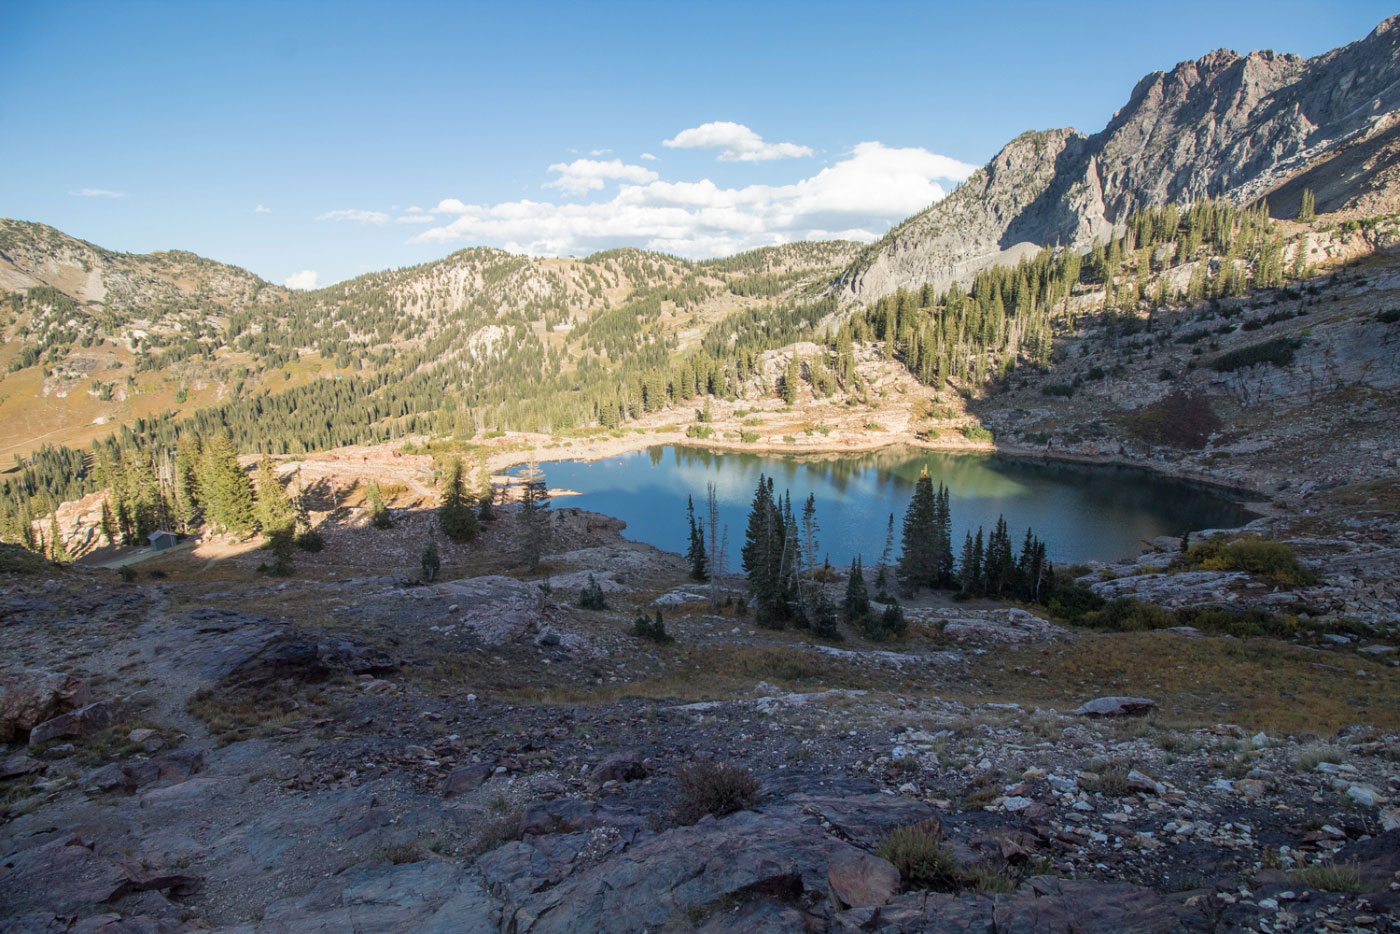 Hike Mount Baldy via Cecret Lake in Wasatch-Cache National Forest, Utah - Stav is Lost